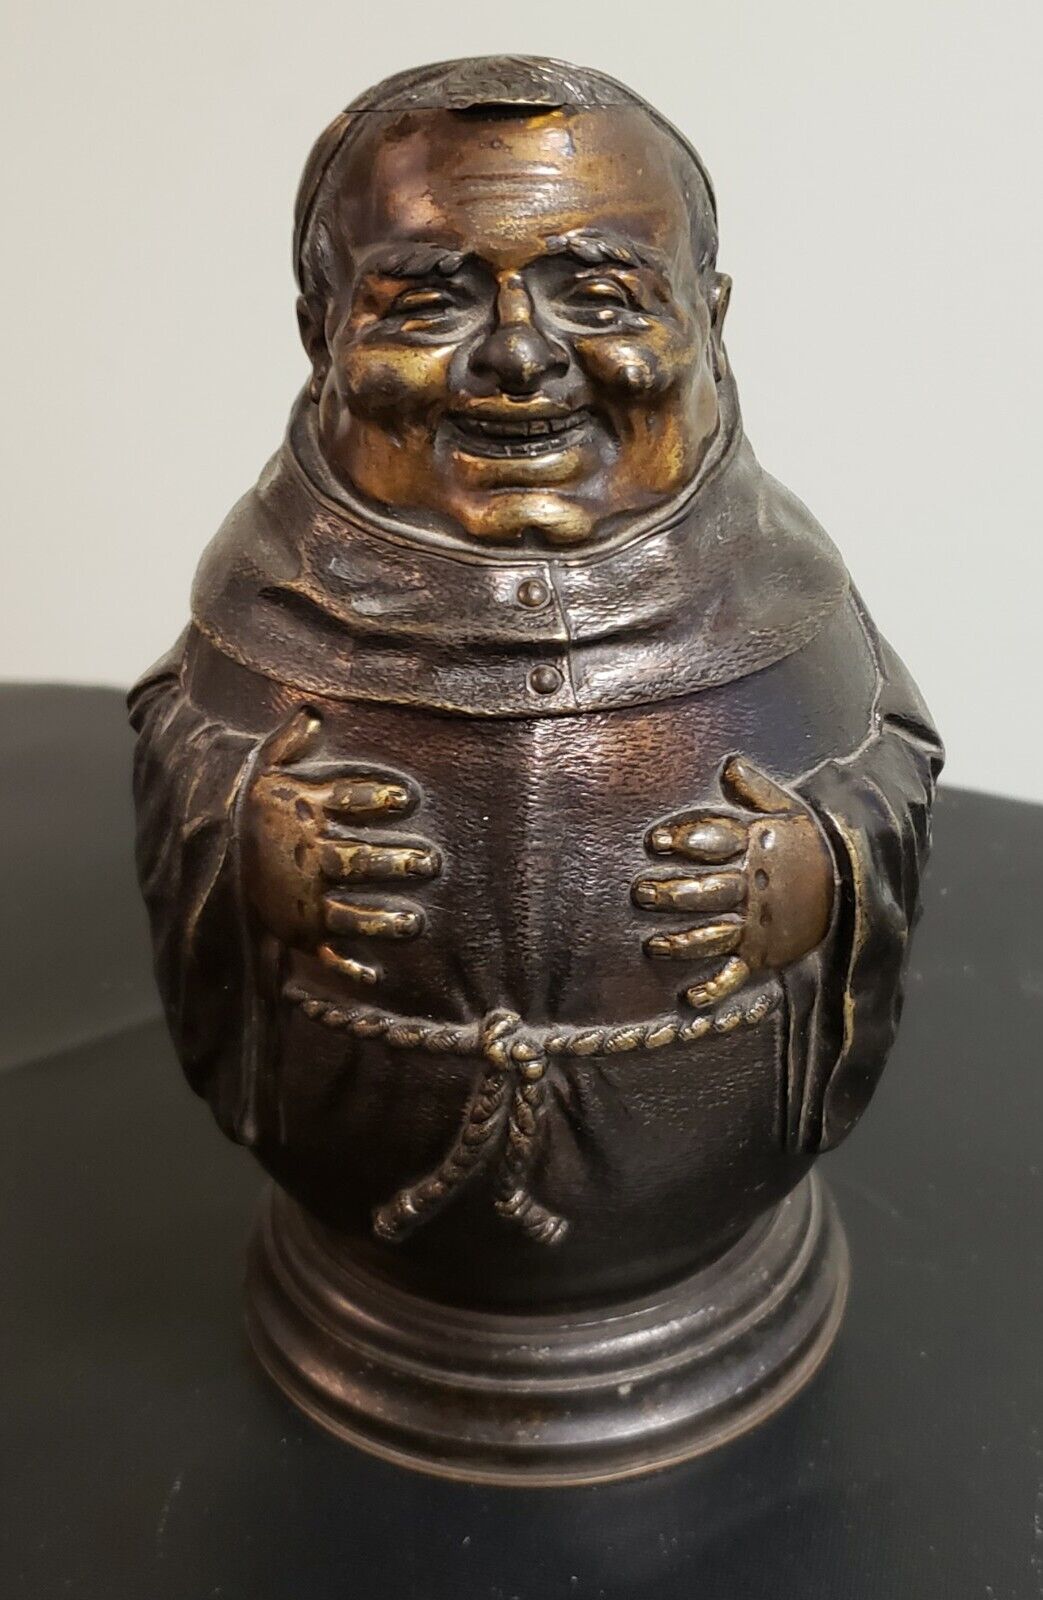 1881 BRONZE TOBACCO JAR PRESENT FROM PRINCE EDWARD OF WALES TO ADMIRAL H.GLYN 